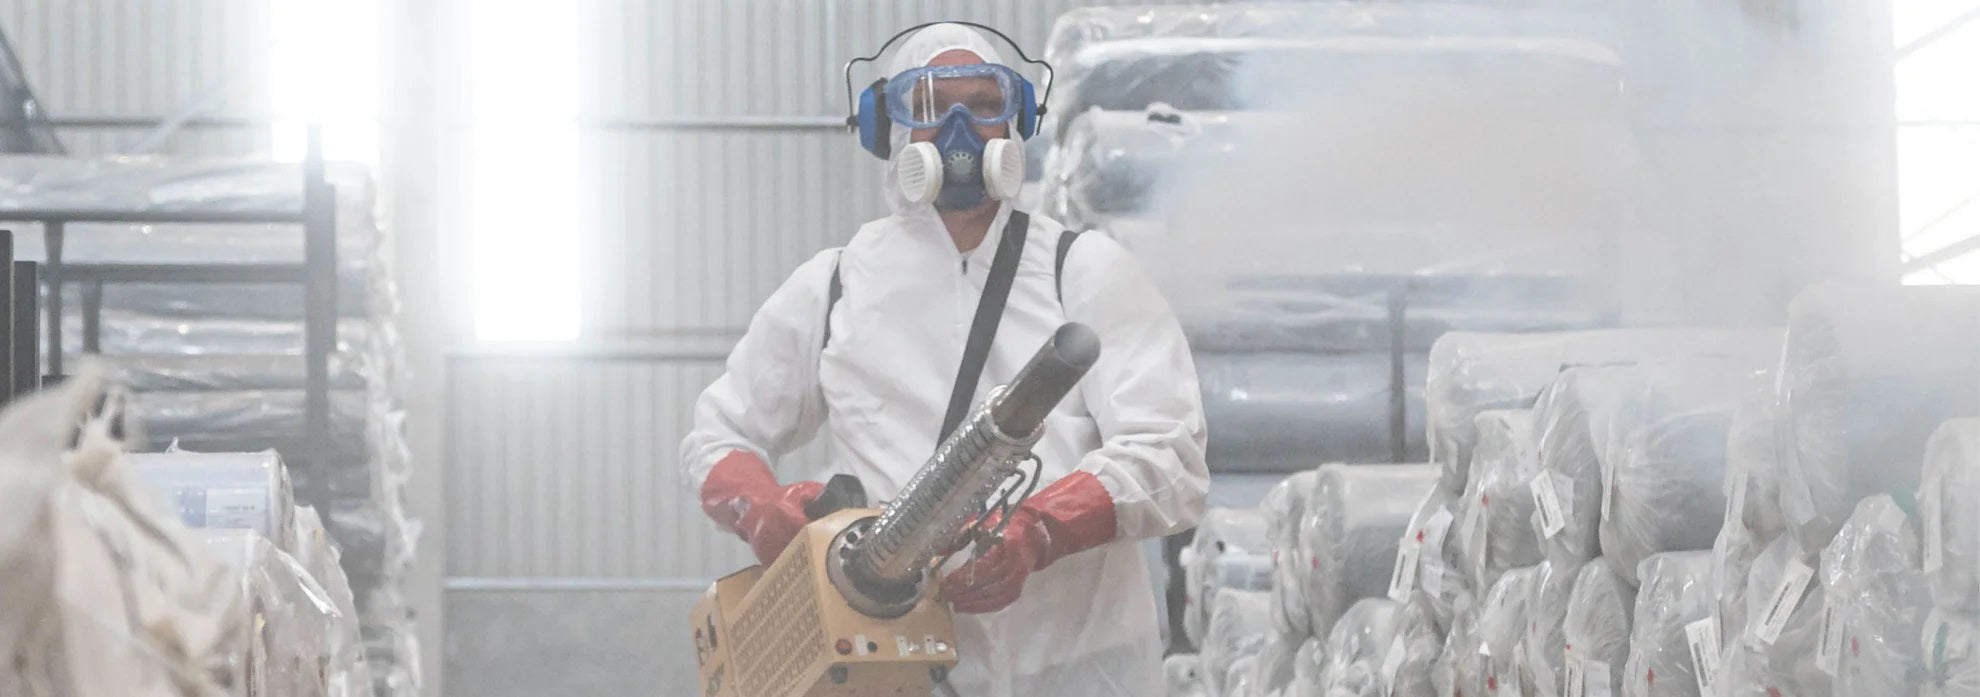 Man in a protective white suite with a dust mask and holding a blower